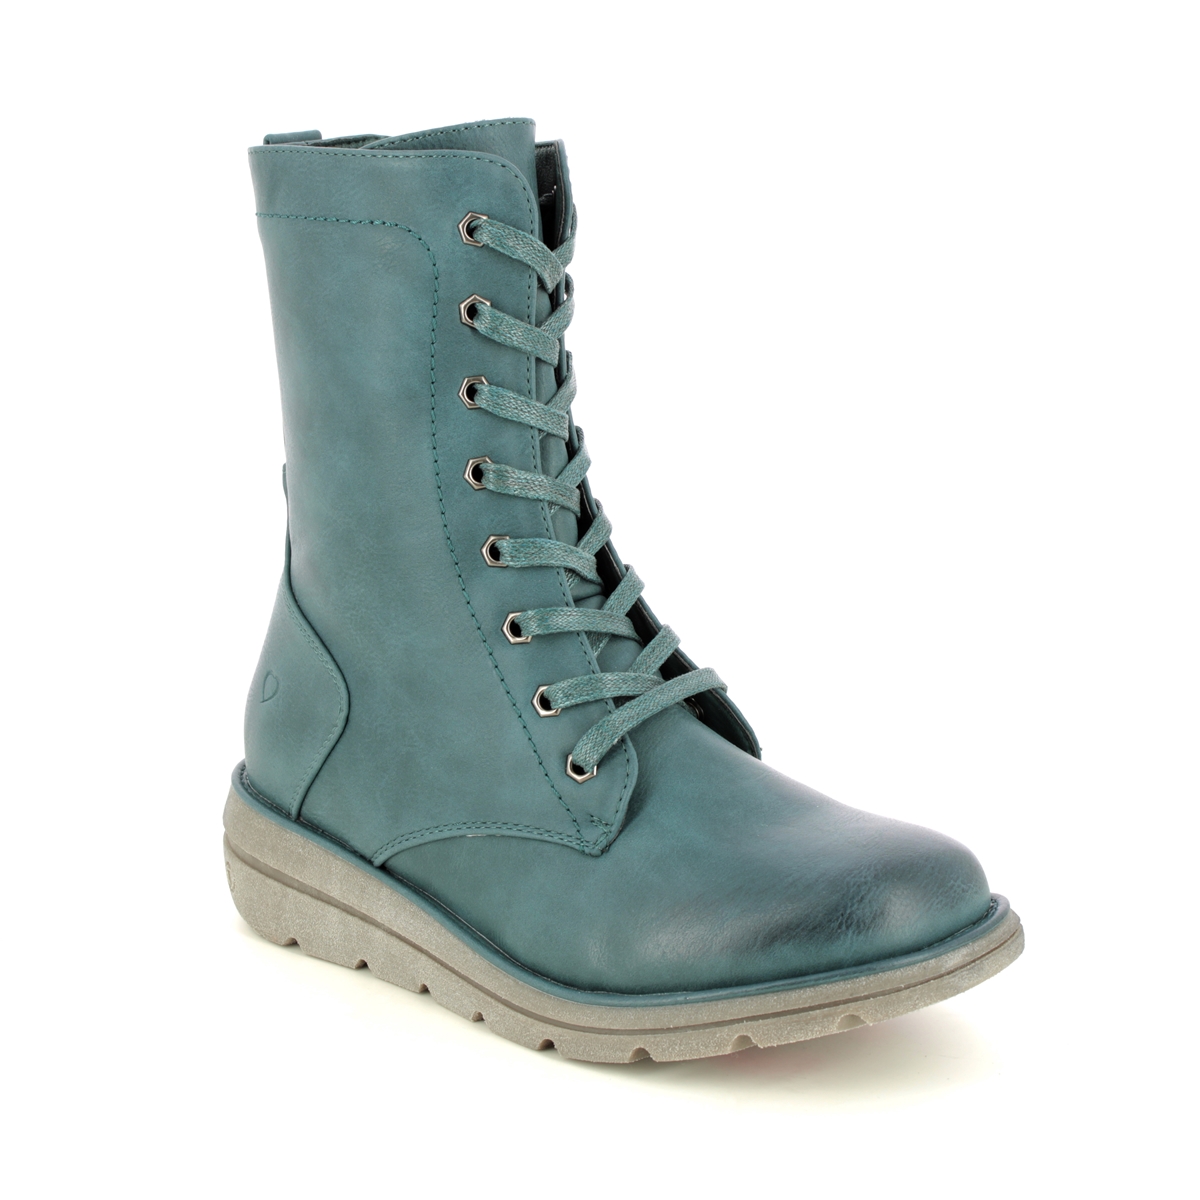 Heavenly Feet Martina 3 Walker 3007-70 Turquoise Lace Up Boots